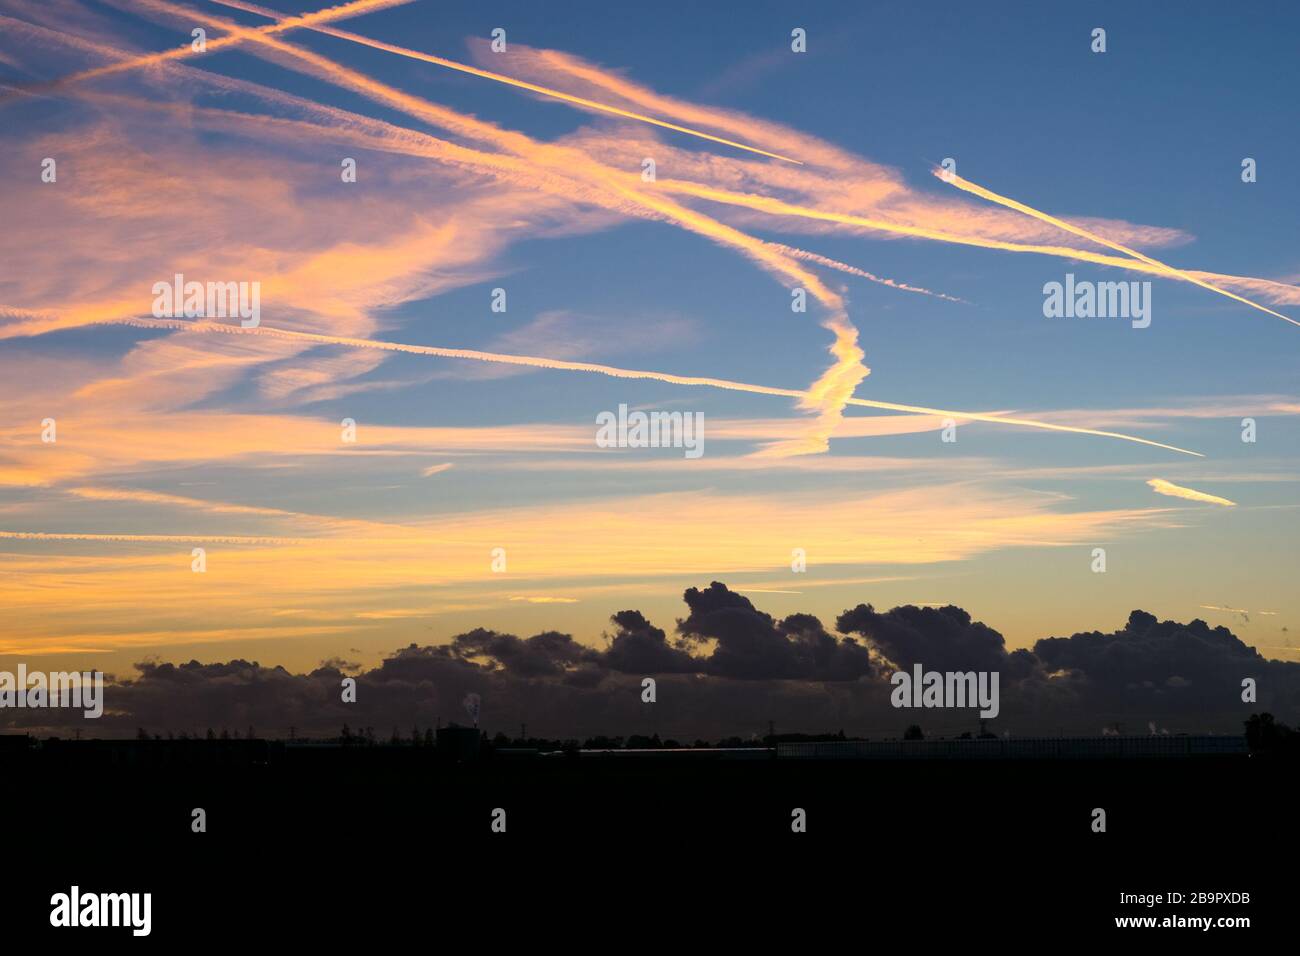 Colorful contrails high up in the sky are illuminated by the light of the setting sun. Closer to the surface of the earth, there are dark clouds. Stock Photo